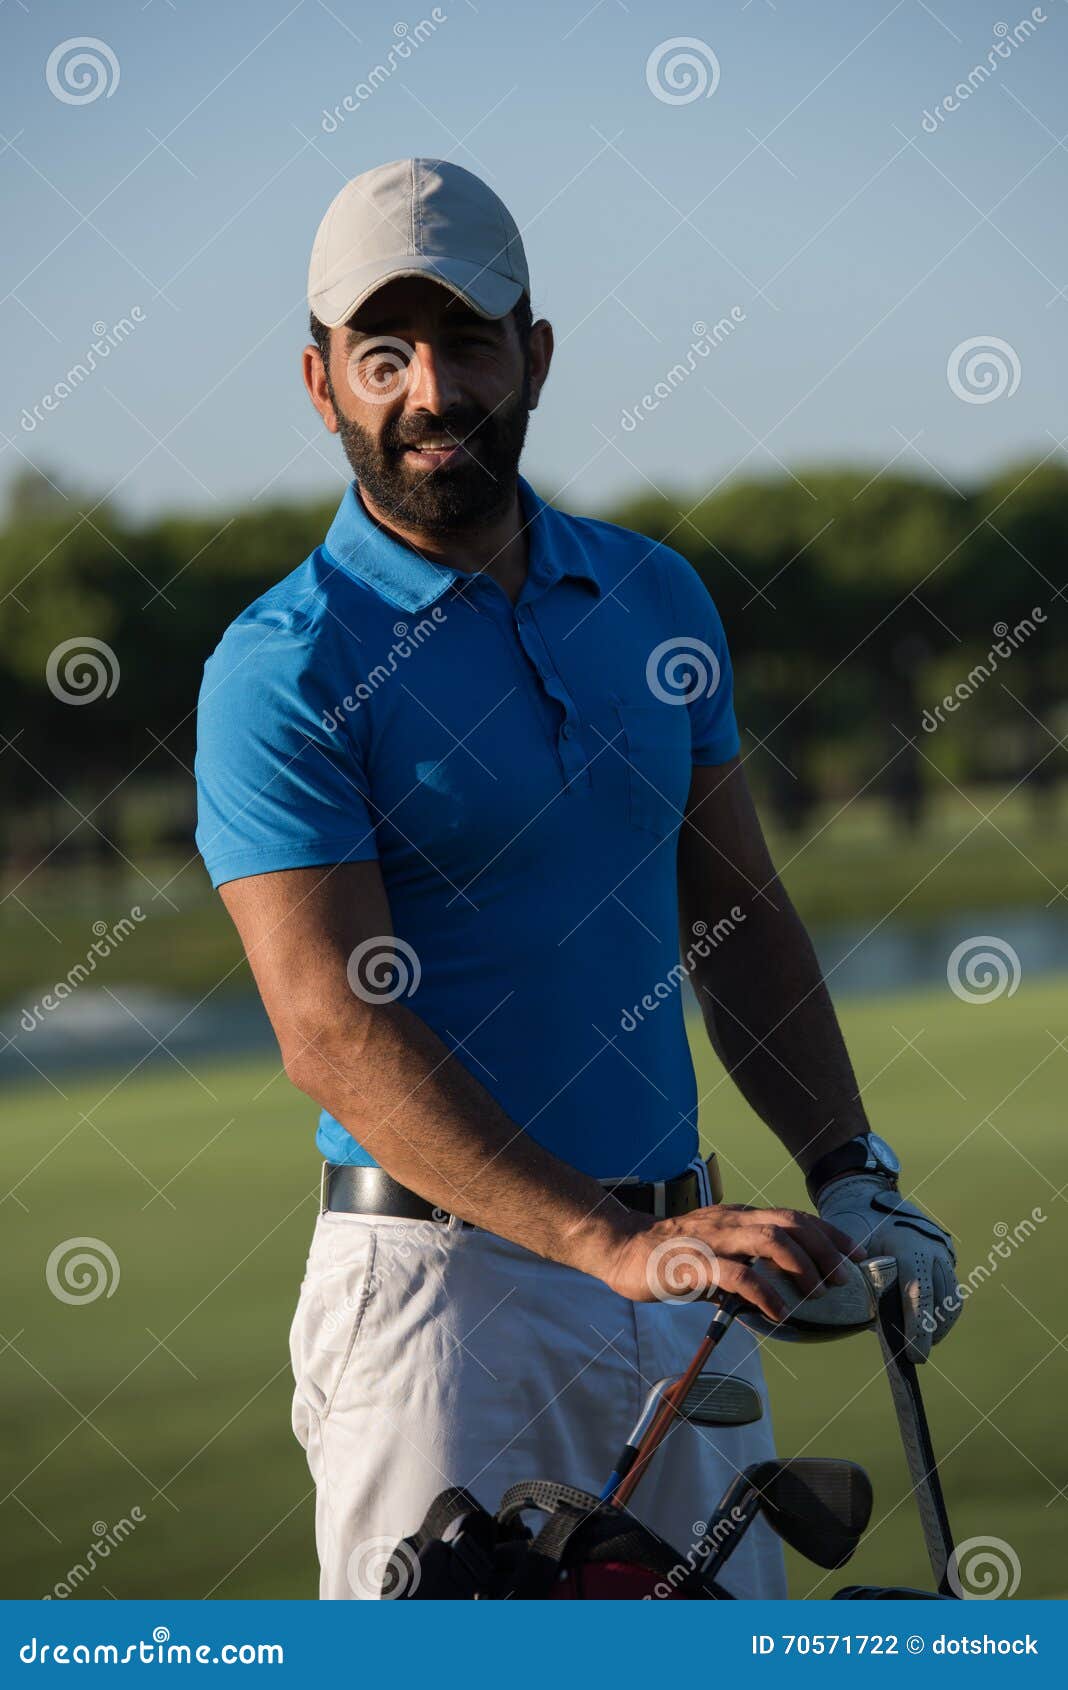 Golfer Portrait at Golf Course Stock Photo - Image of beard, player ...